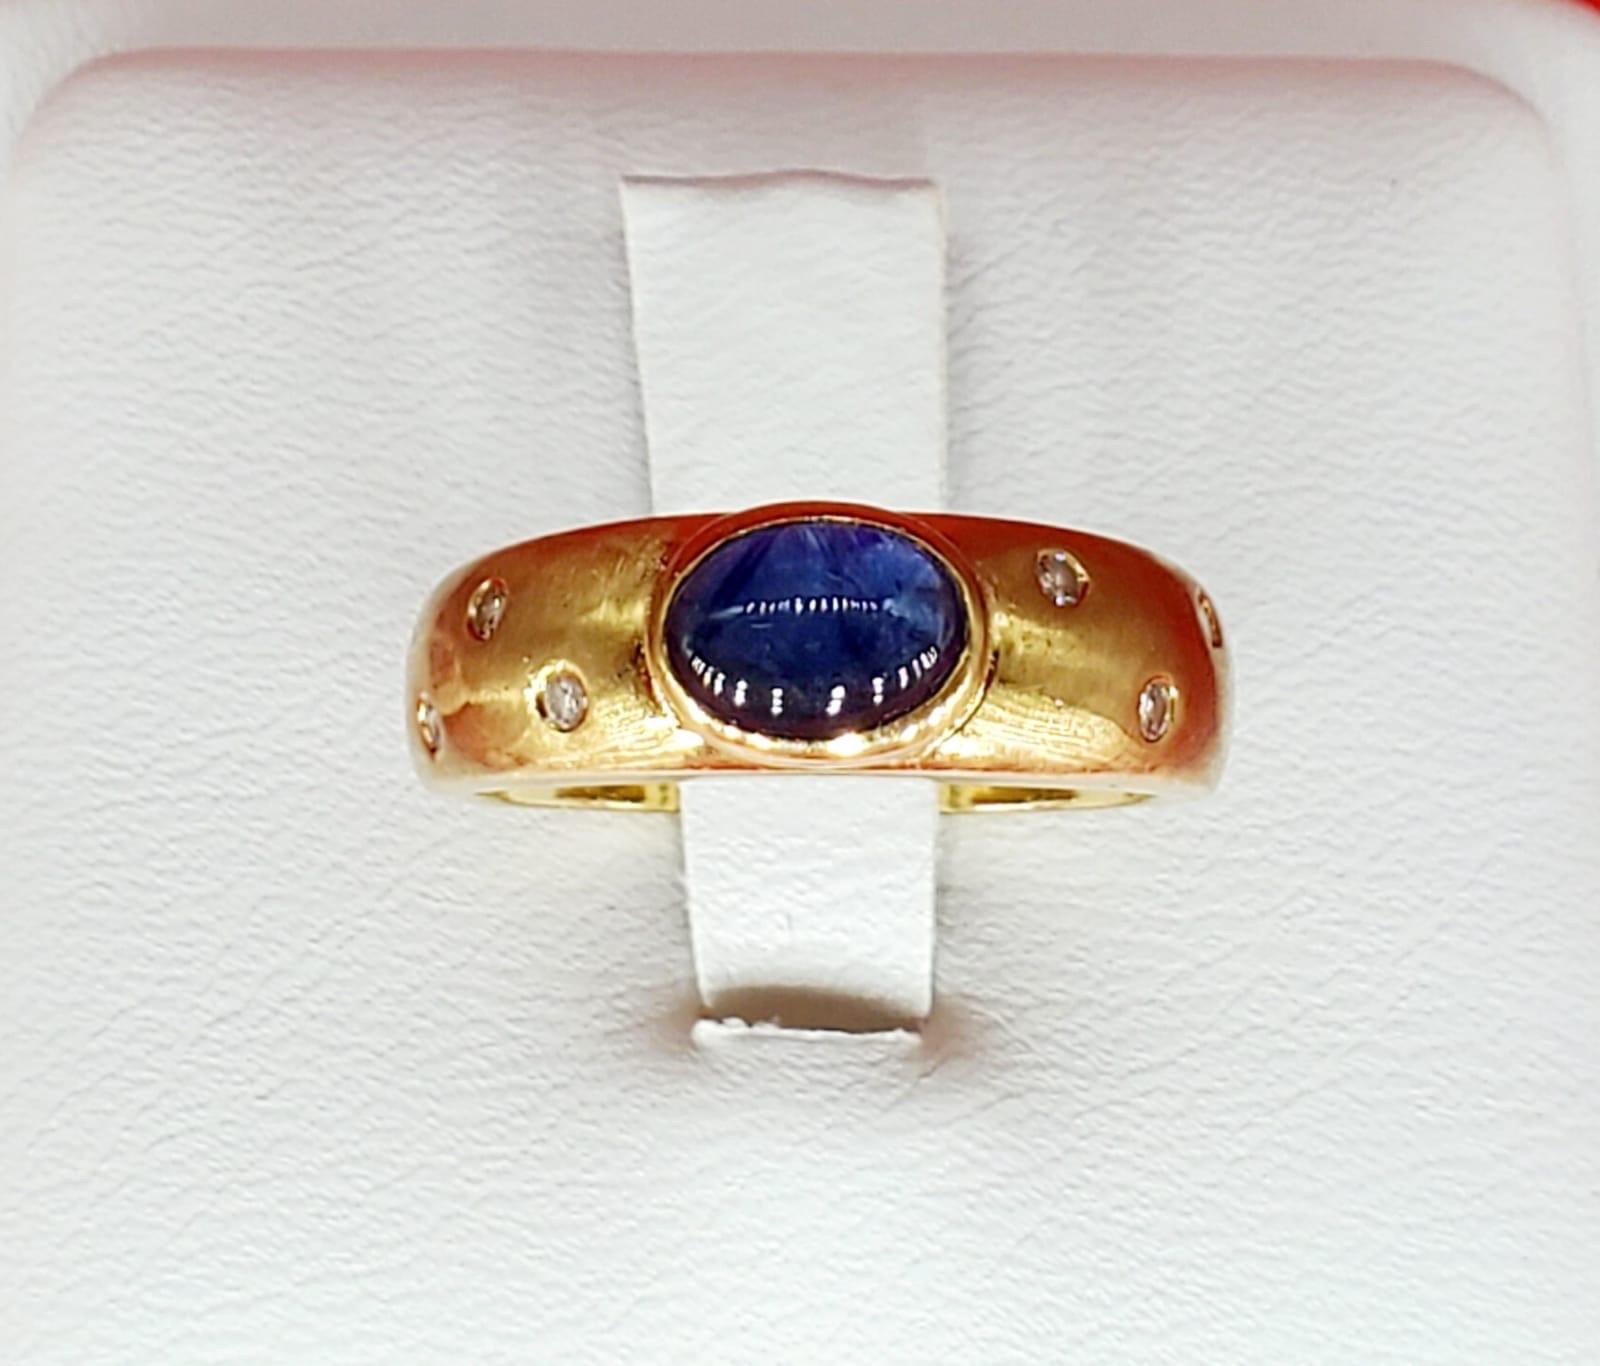 Outstanding Vintage 1 Carat Sapphire Cabochon & Diamonds Etoile Star Galaxy Ring. The sapphire weights approx 0.90 carat and the diamonds surrounding the ring total weight approx 0.10 carats. The ring is a Etoile design (means stars in French) which